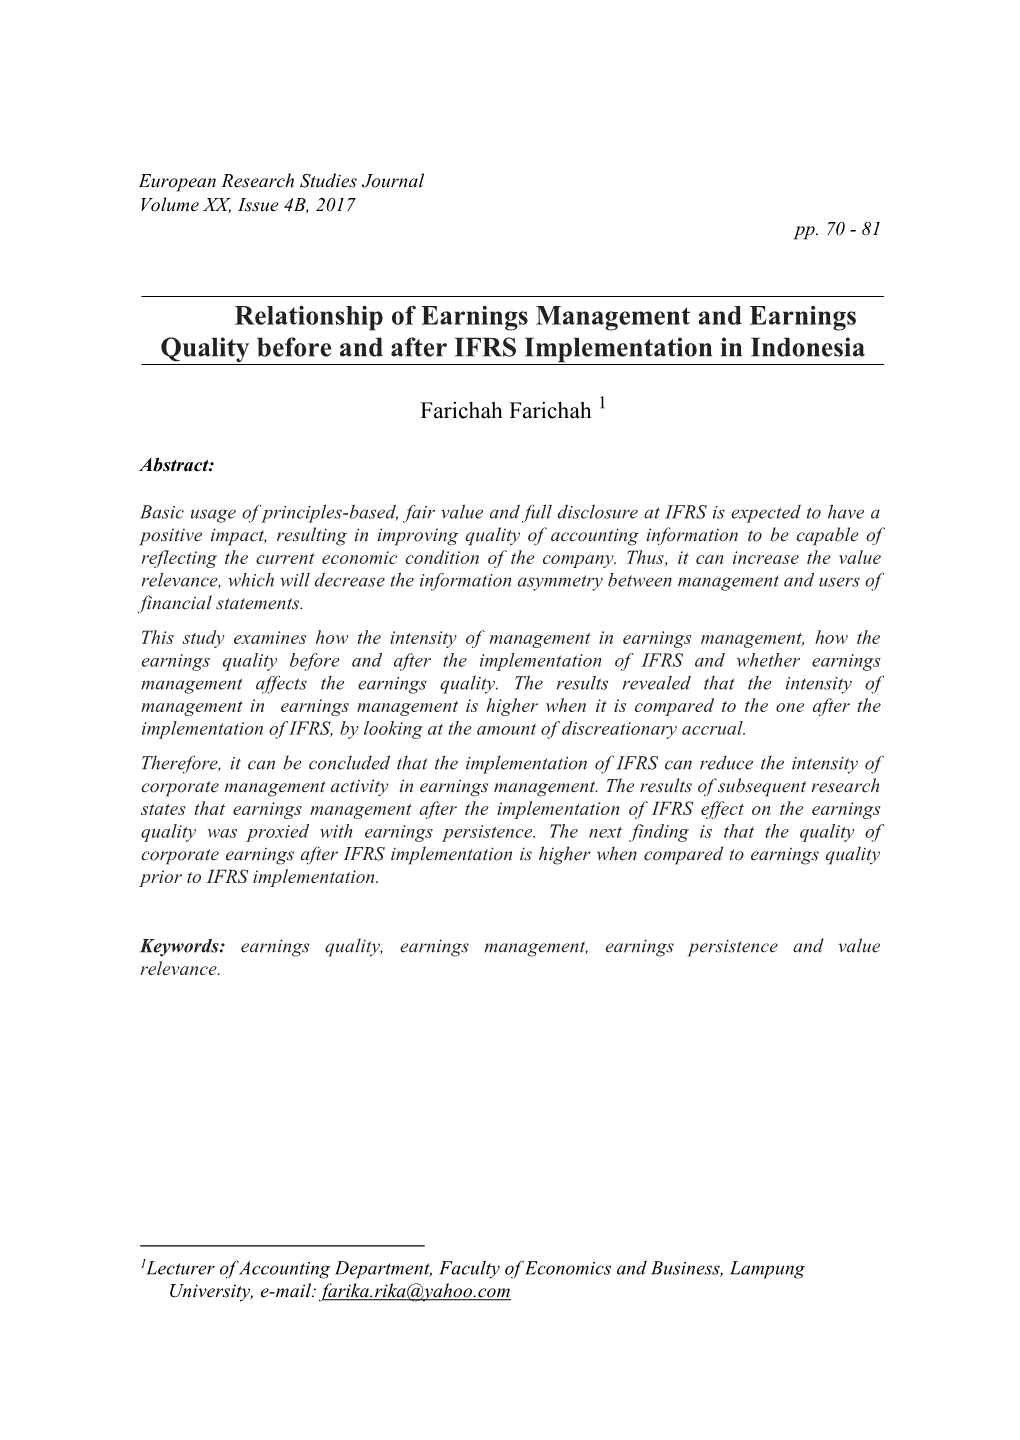 Relationship of Earnings Management and Earnings Quality Before and After IFRS Implementation in Indonesia